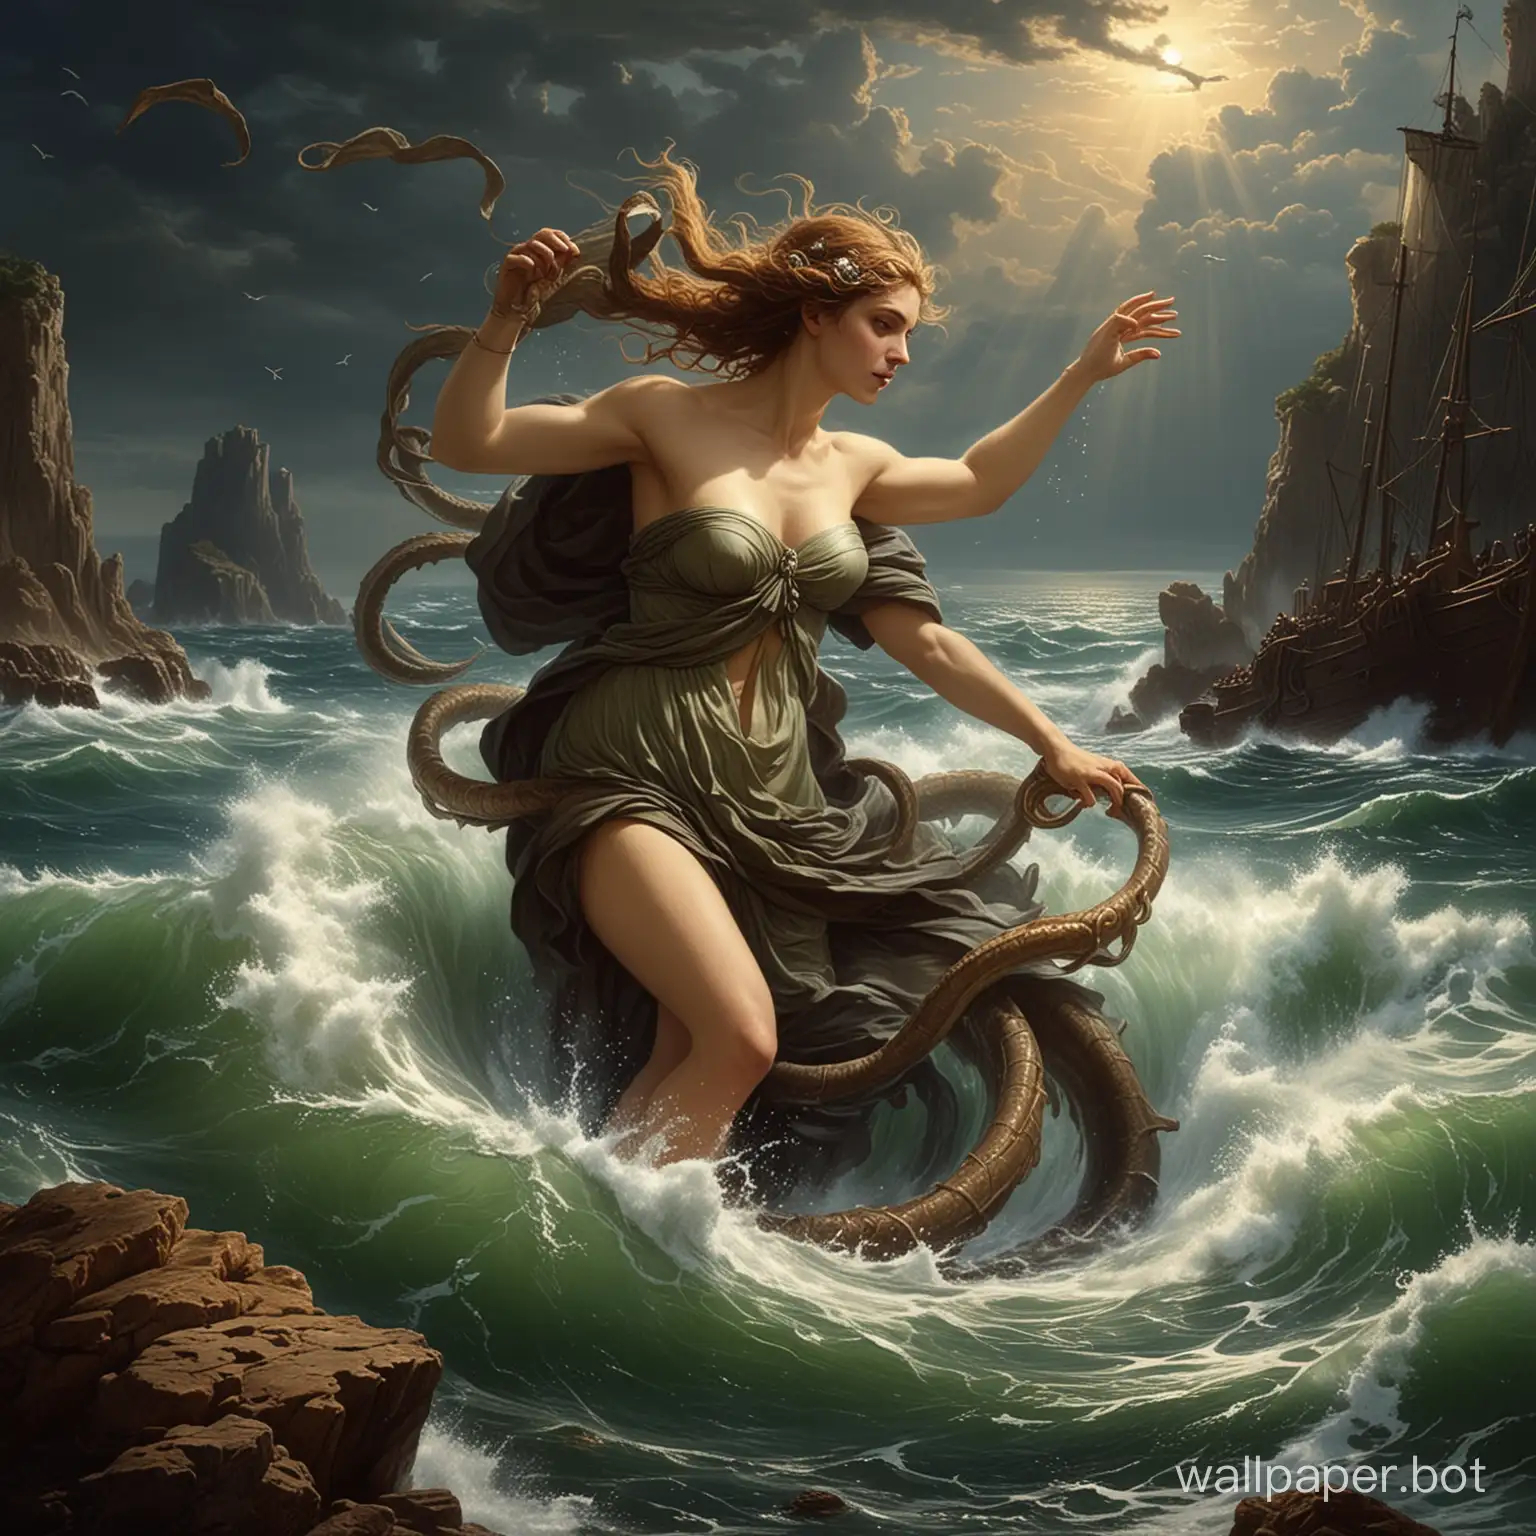 Mythical-Sea-Monster-Charybdis-Swallowing-Ships-in-Ancient-Greek-Lore